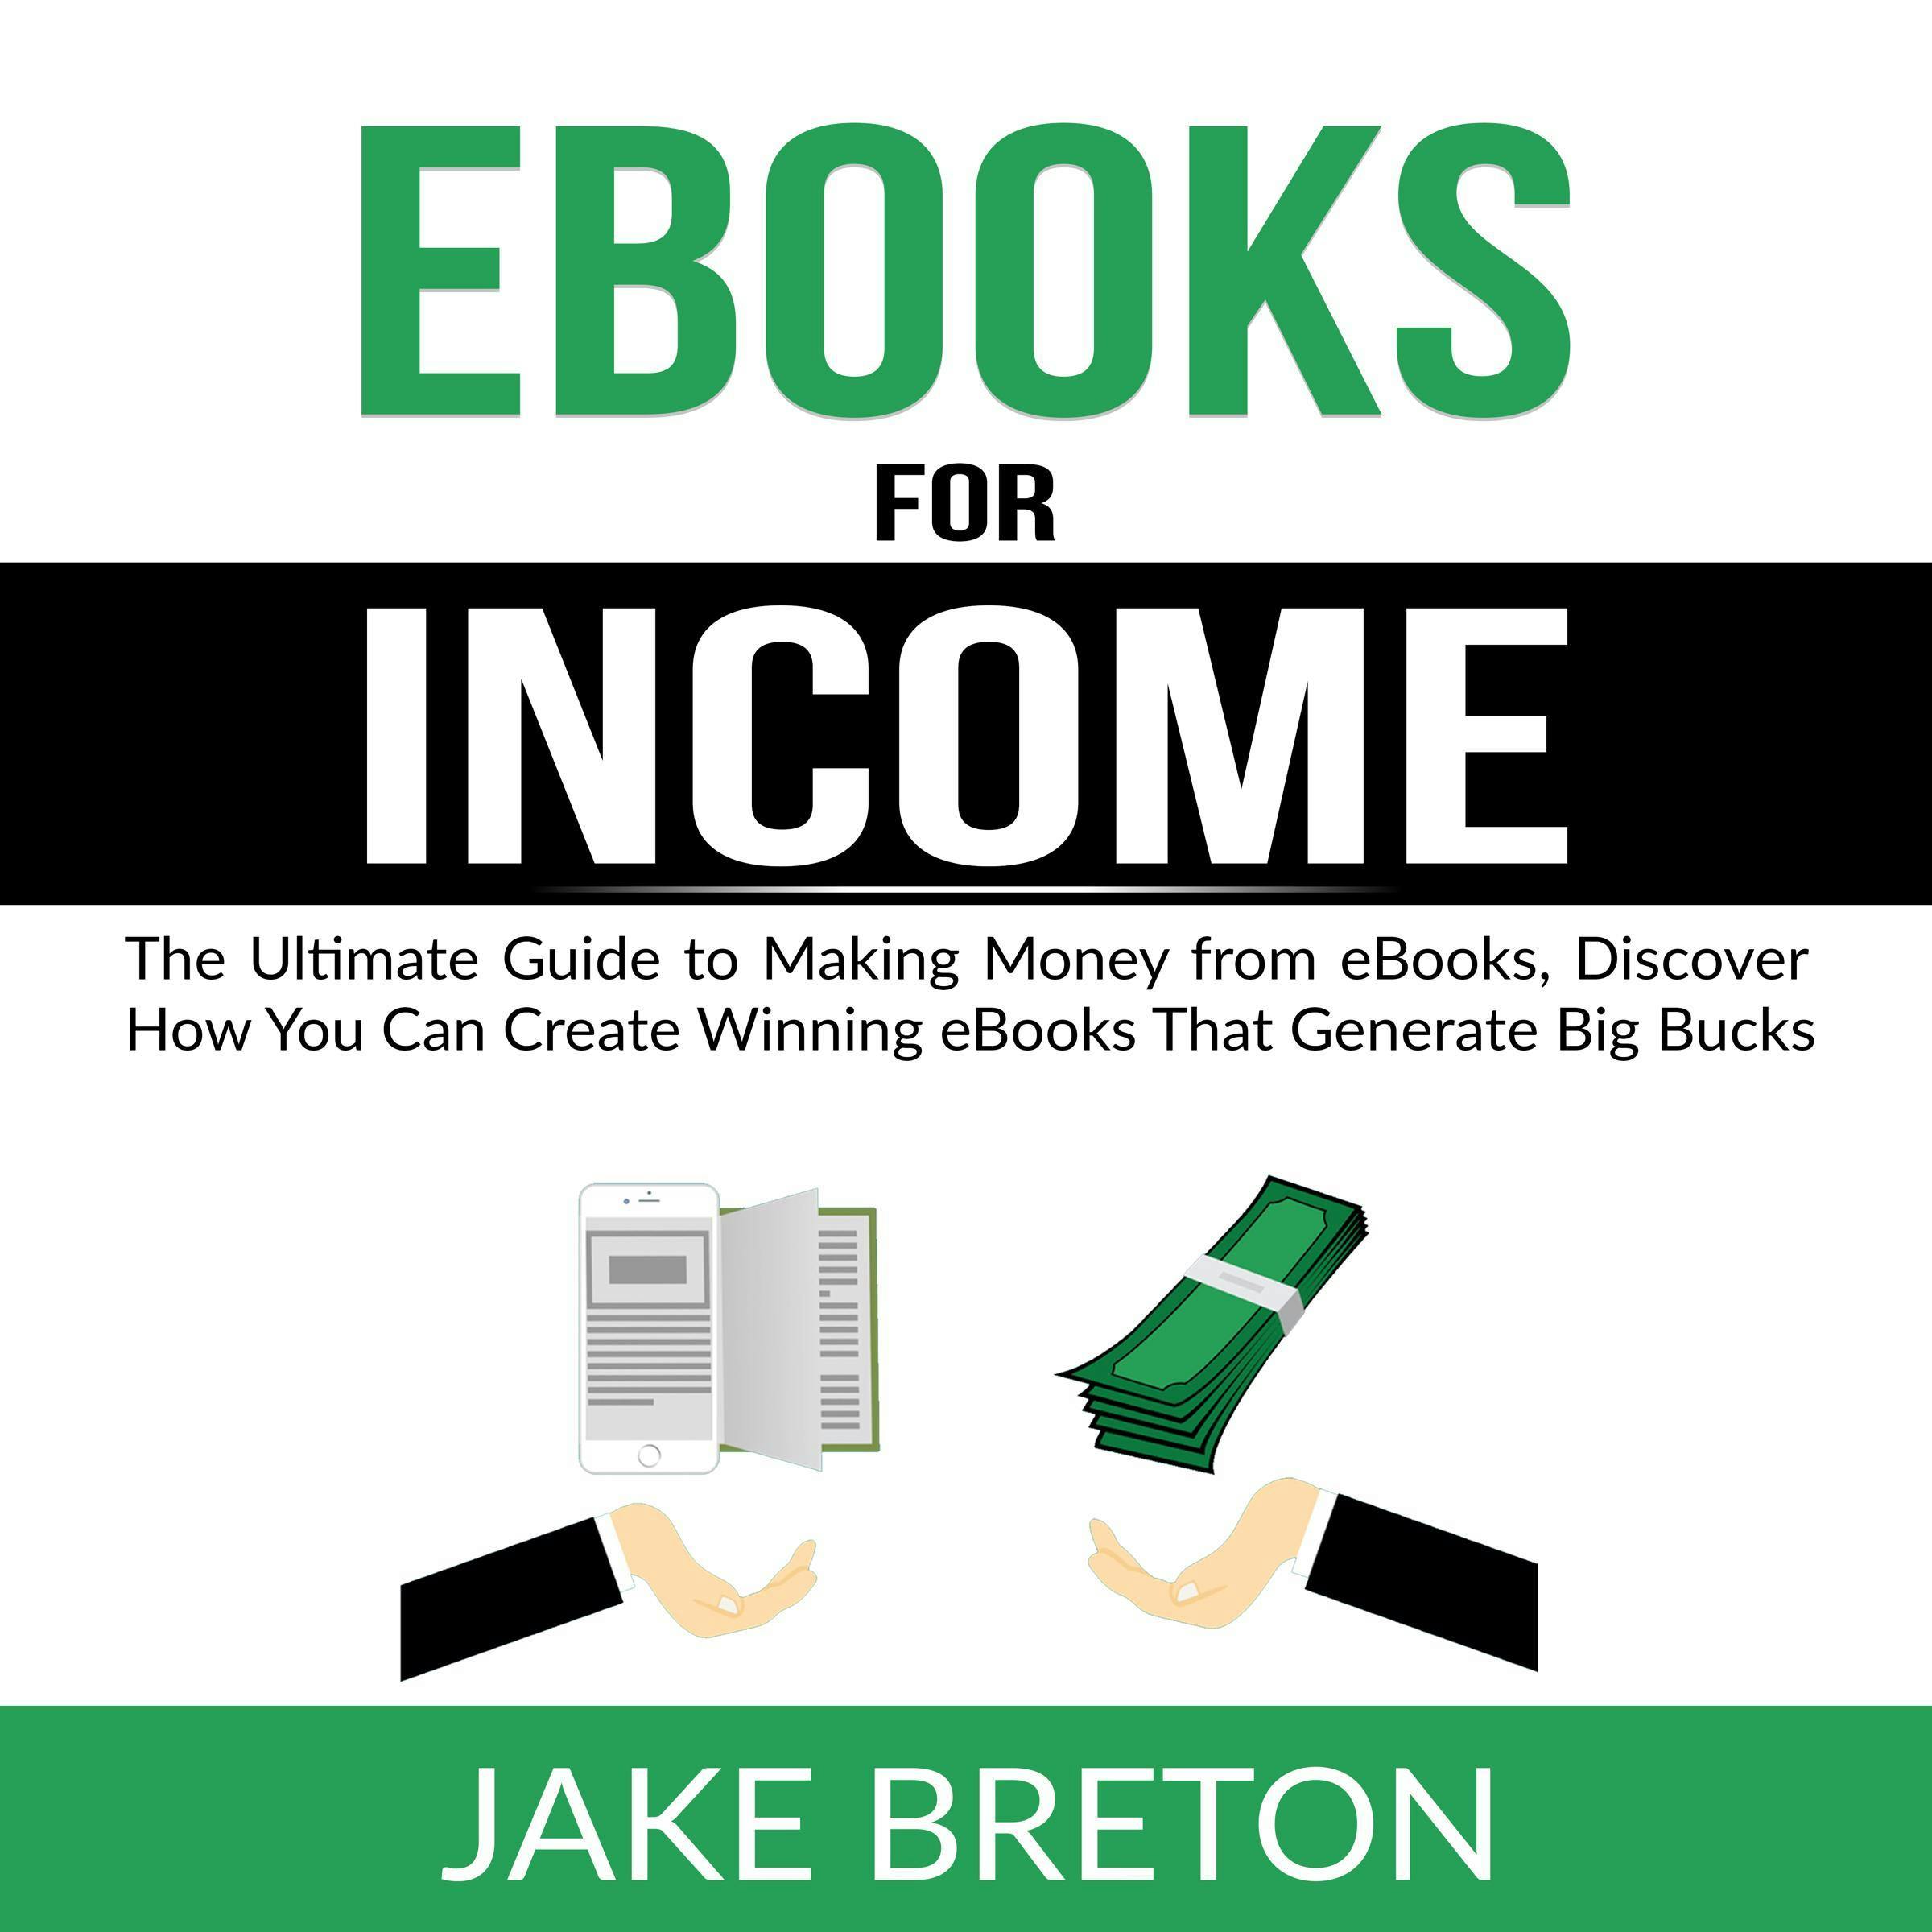 eBooks for Income: The Ultimate Guide to Making Money from eBooks, Discover How You Can Create Winning eBooks That Generate Big Bucks - Jake Breton